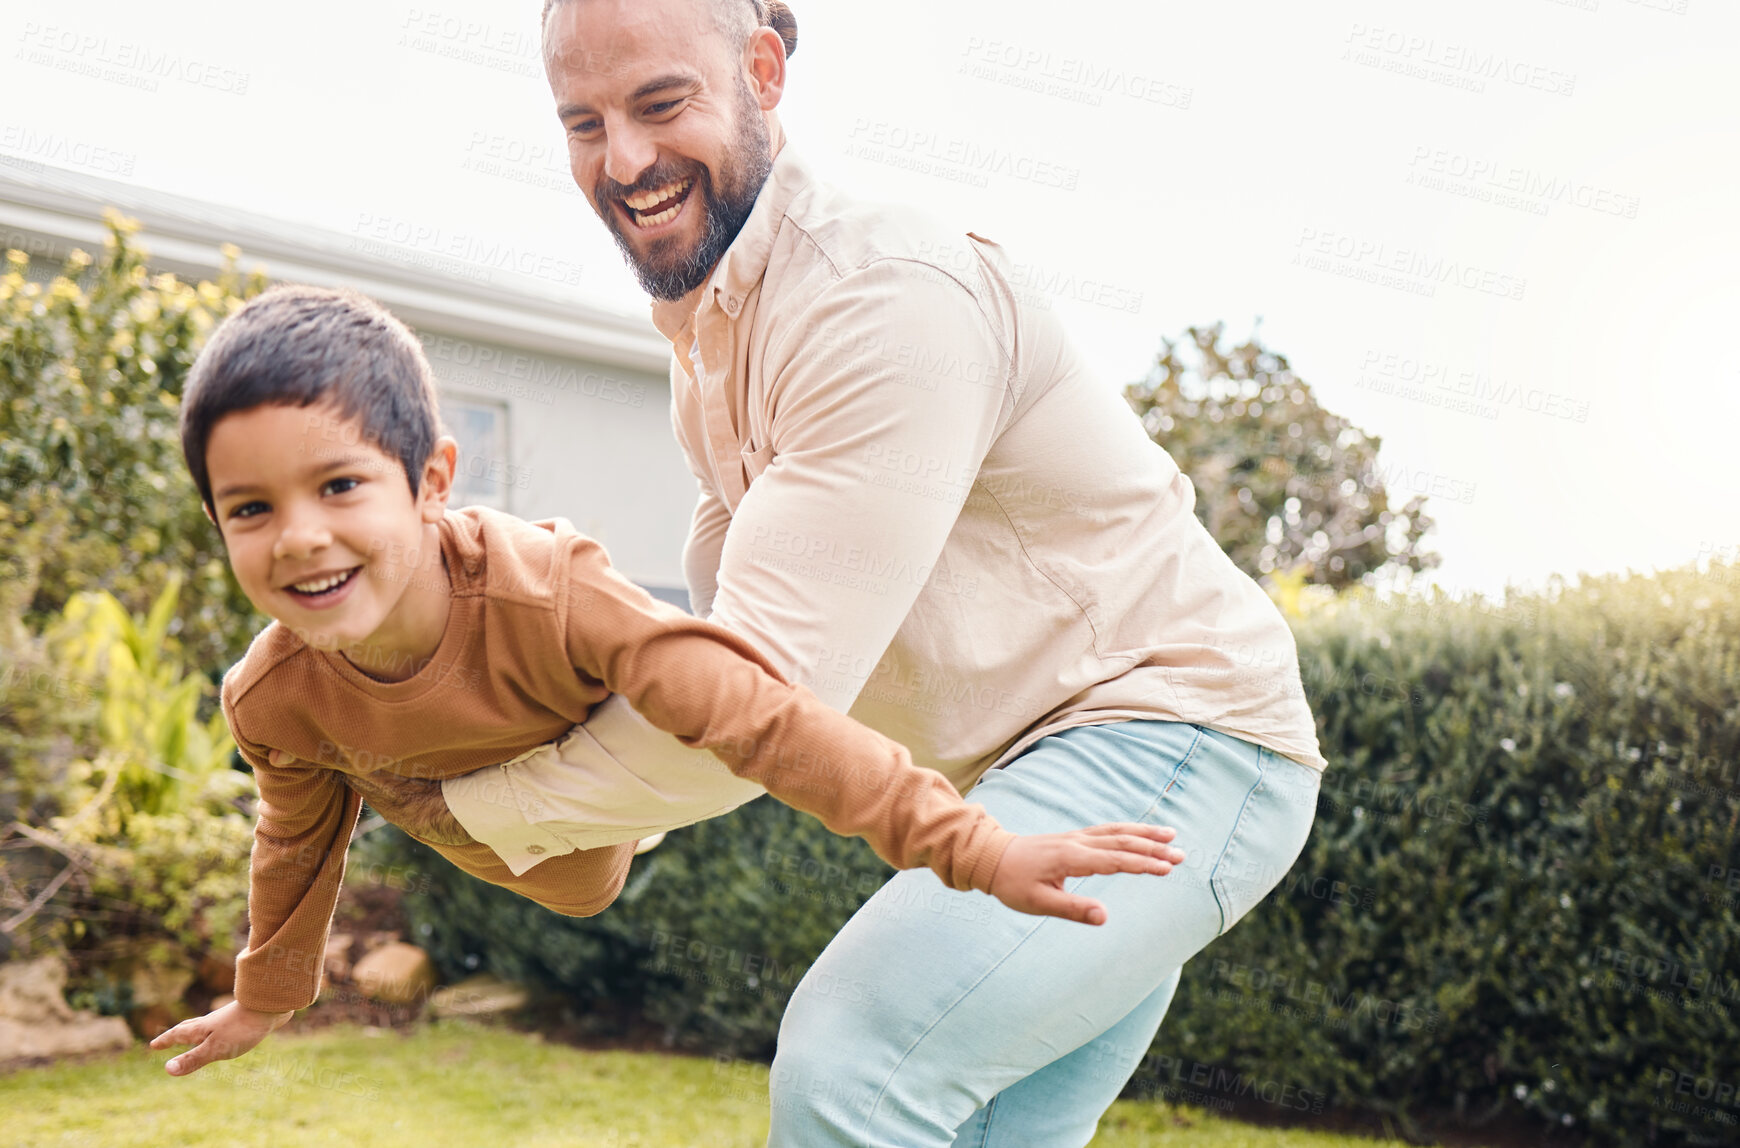 Buy stock photo Carefree, flying and portrait of a father with a child in a garden for freedom, play and bonding. Happy, laughing and dad holding a boy kid to fly while playing in the backyard of a house together